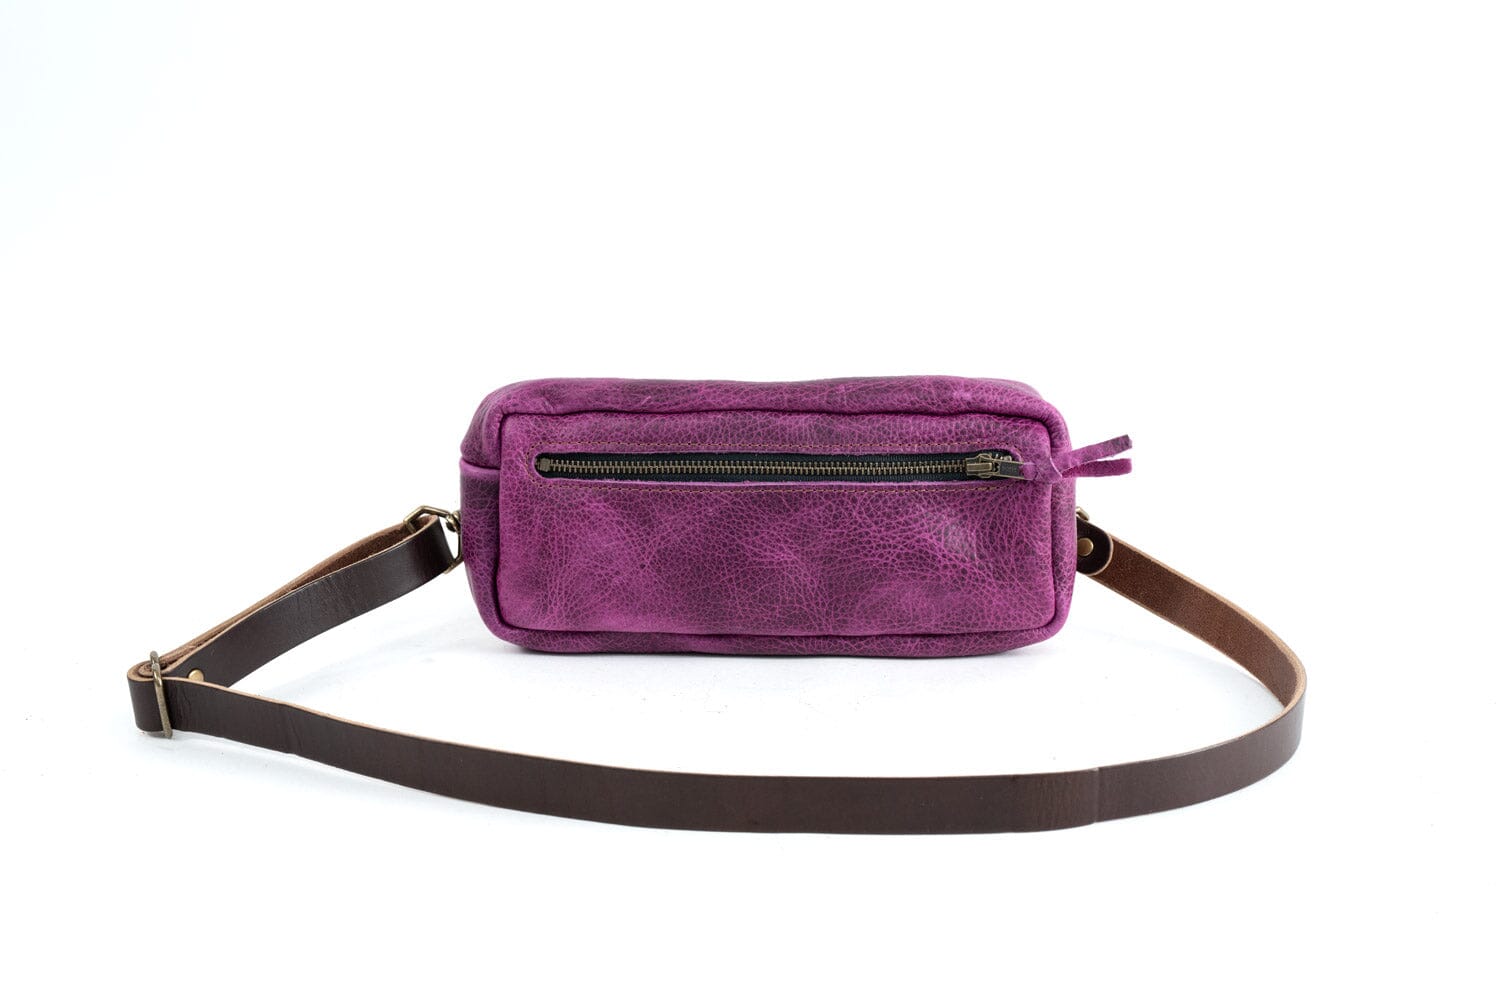 LEATHER FANNY PACK / LEATHER WAIST BAG - GRAPE BISON